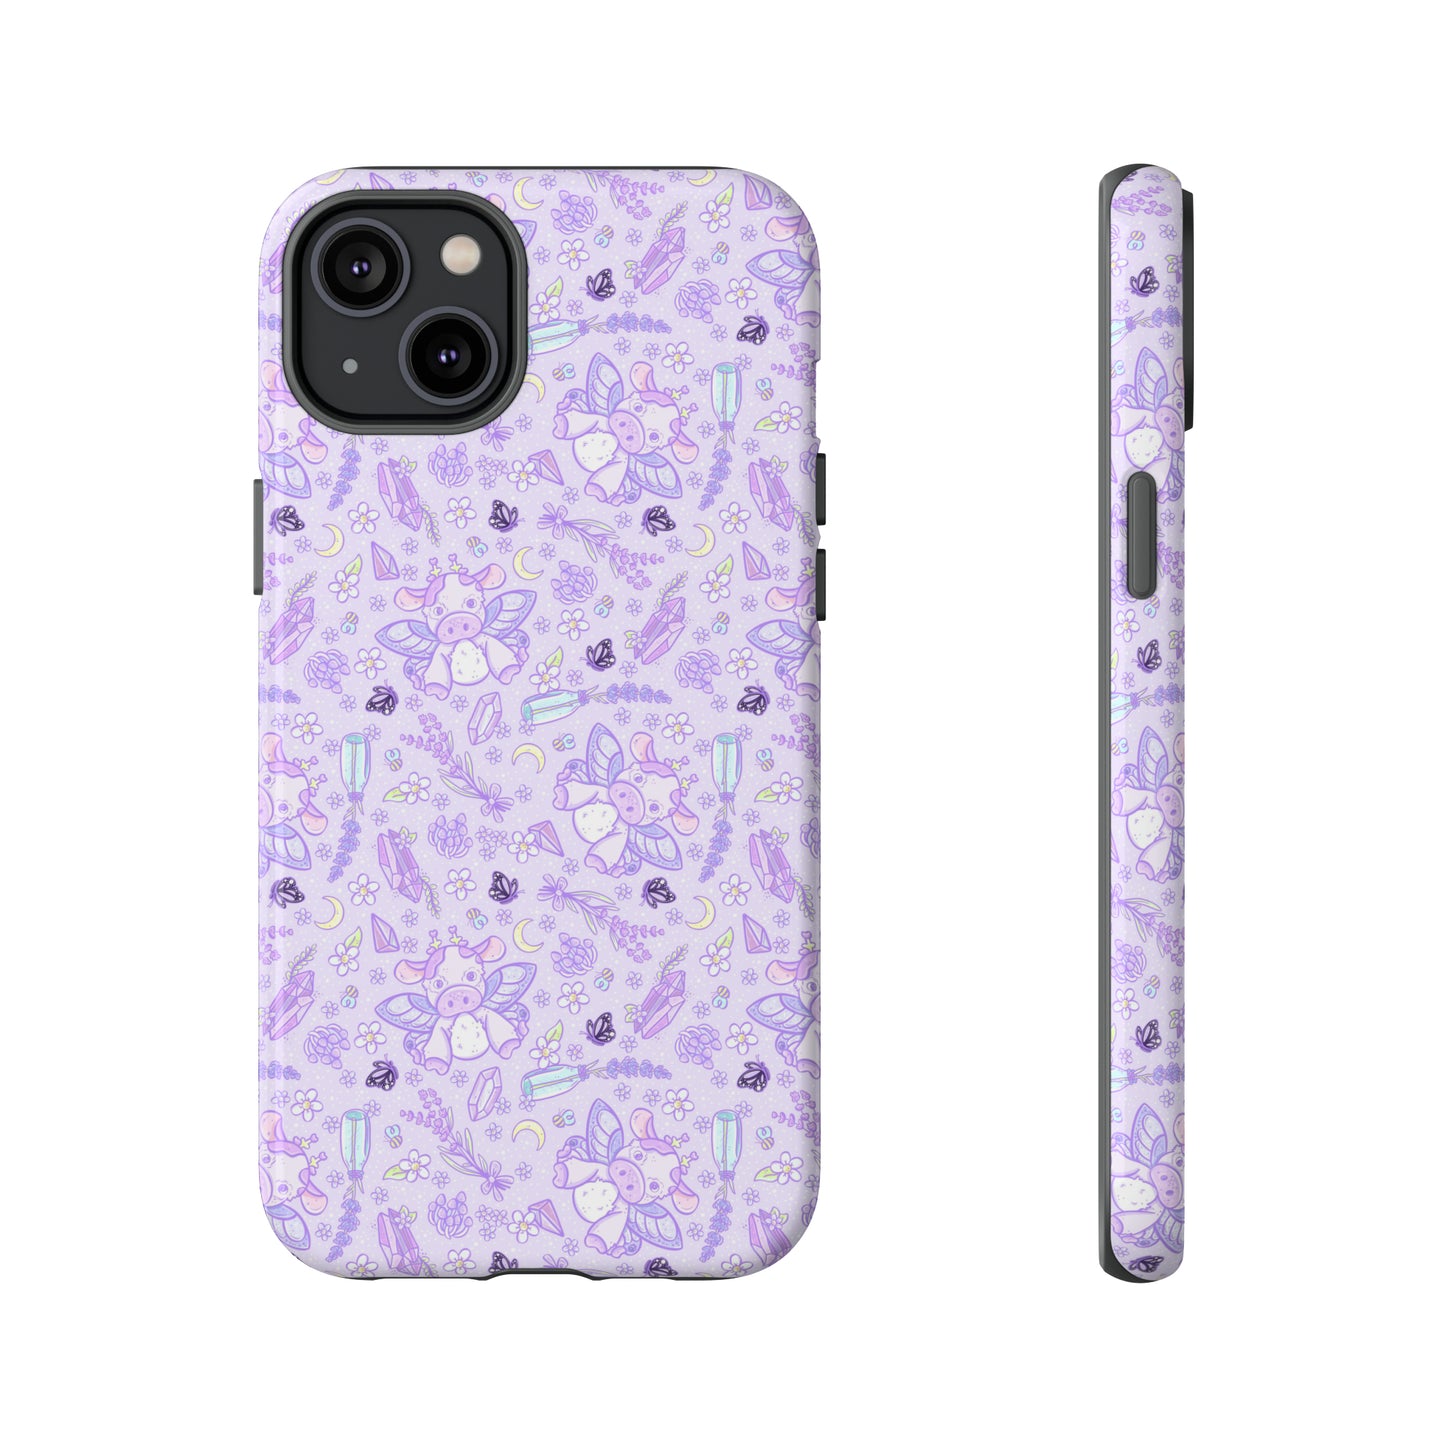 Whimsical Tough Phone Case for Iphones, Samsungs, and Google phones